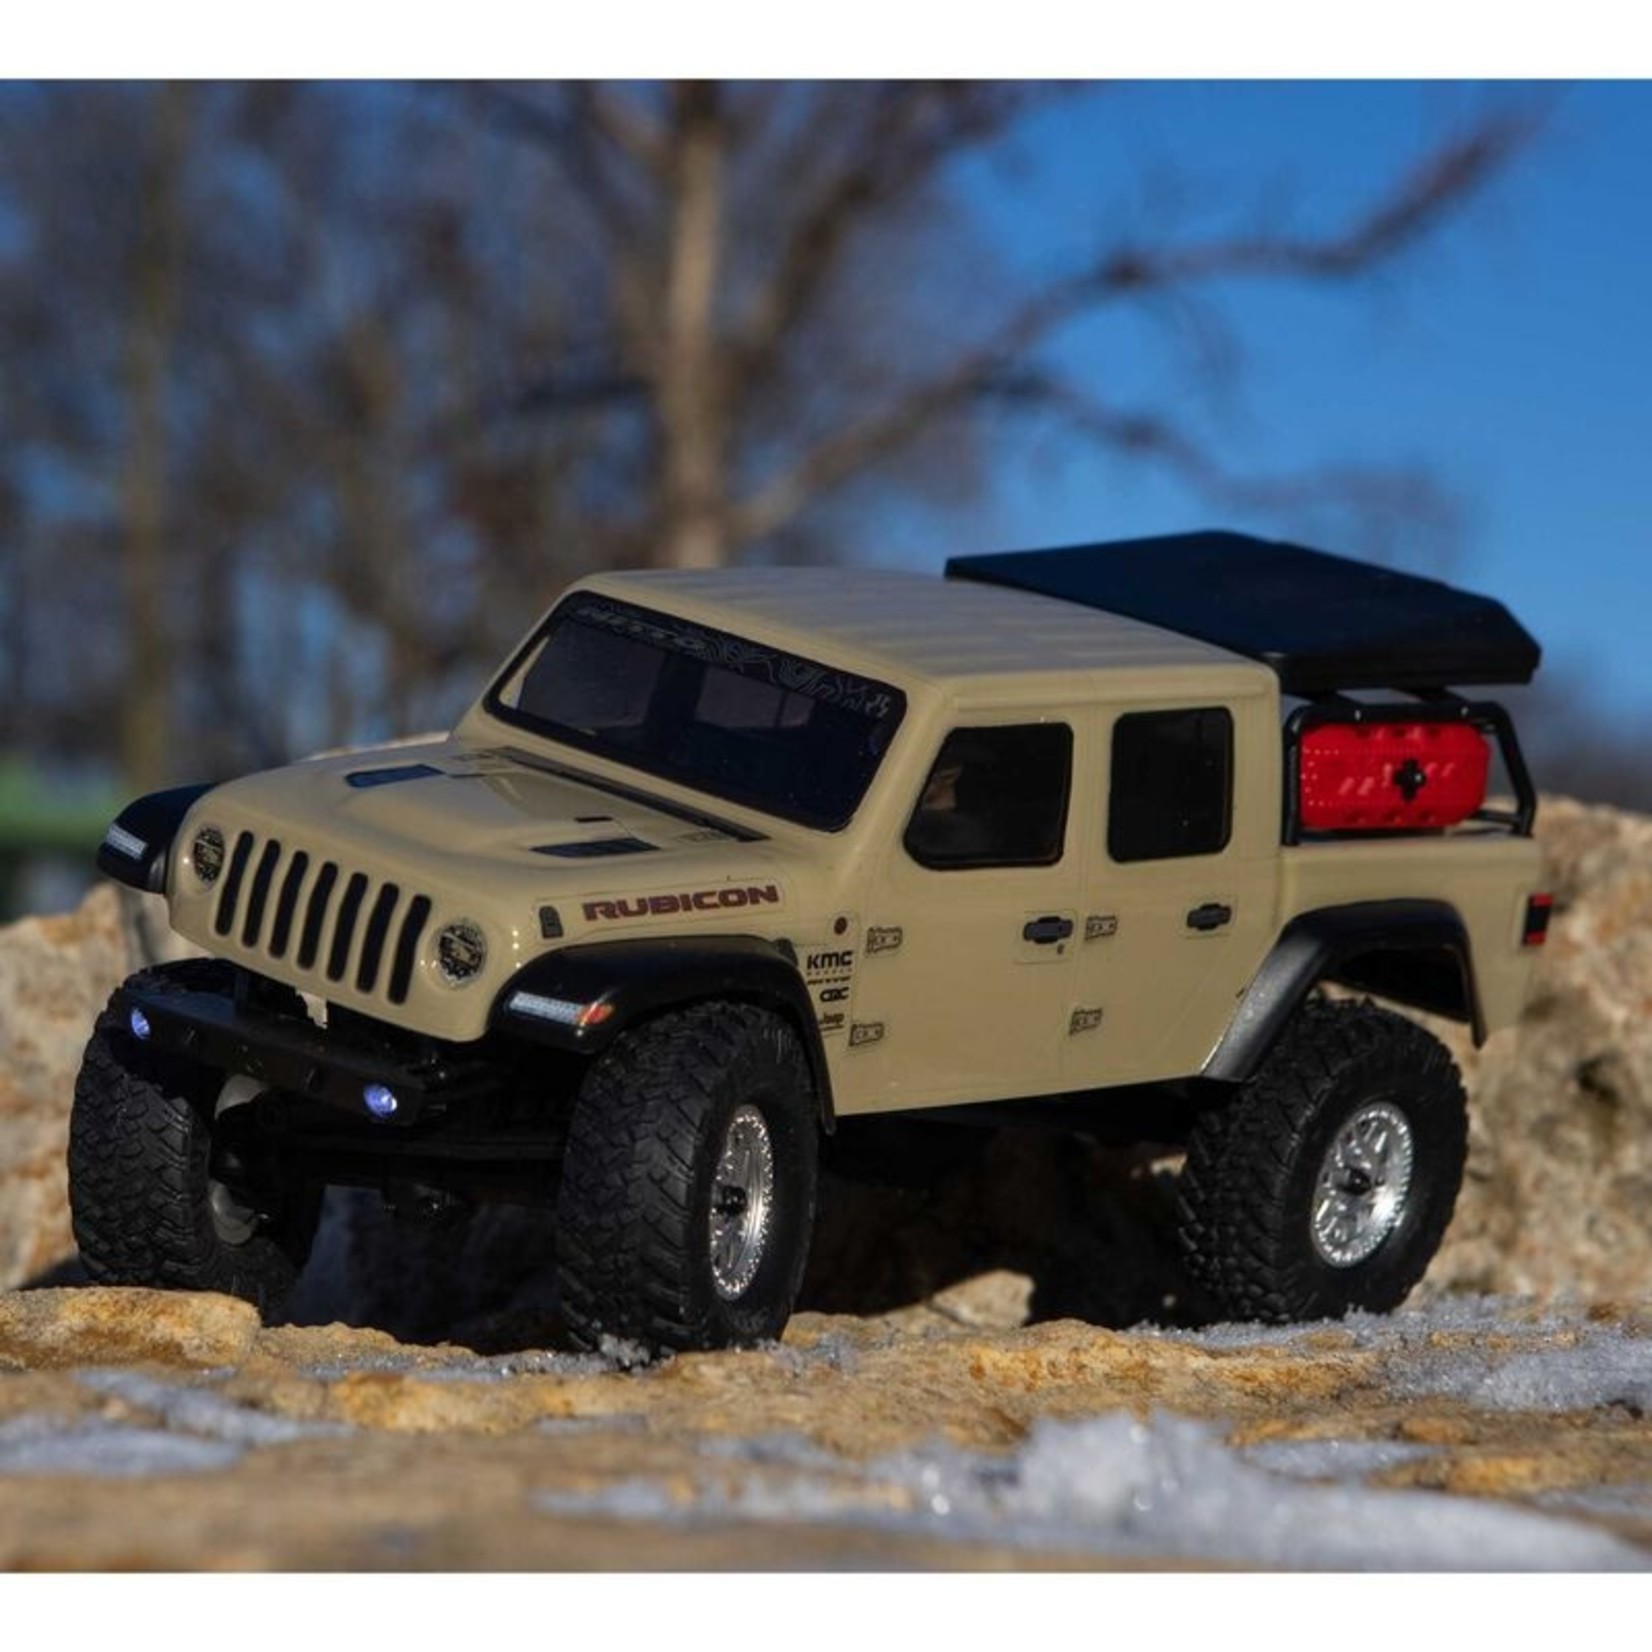 Axial Racing AXI00005T1 1/24 SCX24 Jeep JT Gladiator 4WD Rock Crawler Brushed RTR, Beige